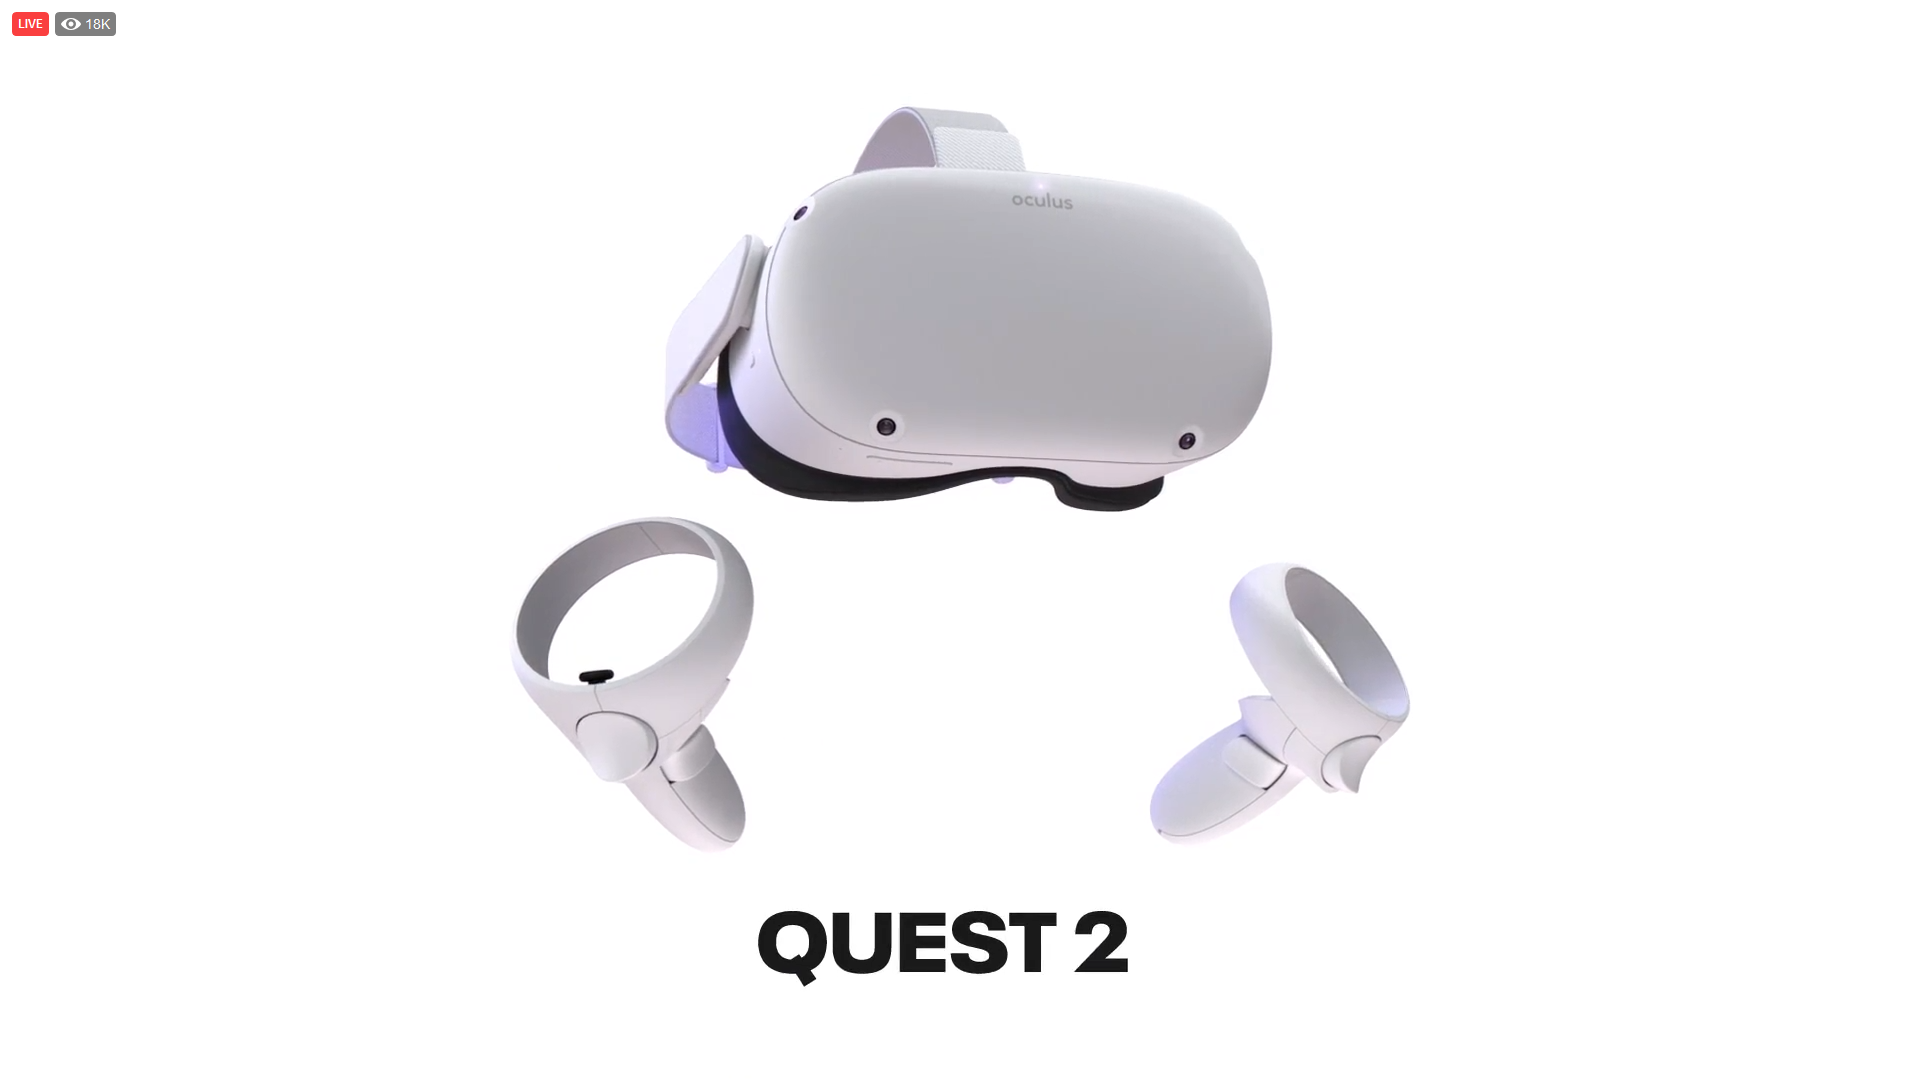 “Unlock the Possibilities with the Oculus Quest 2”